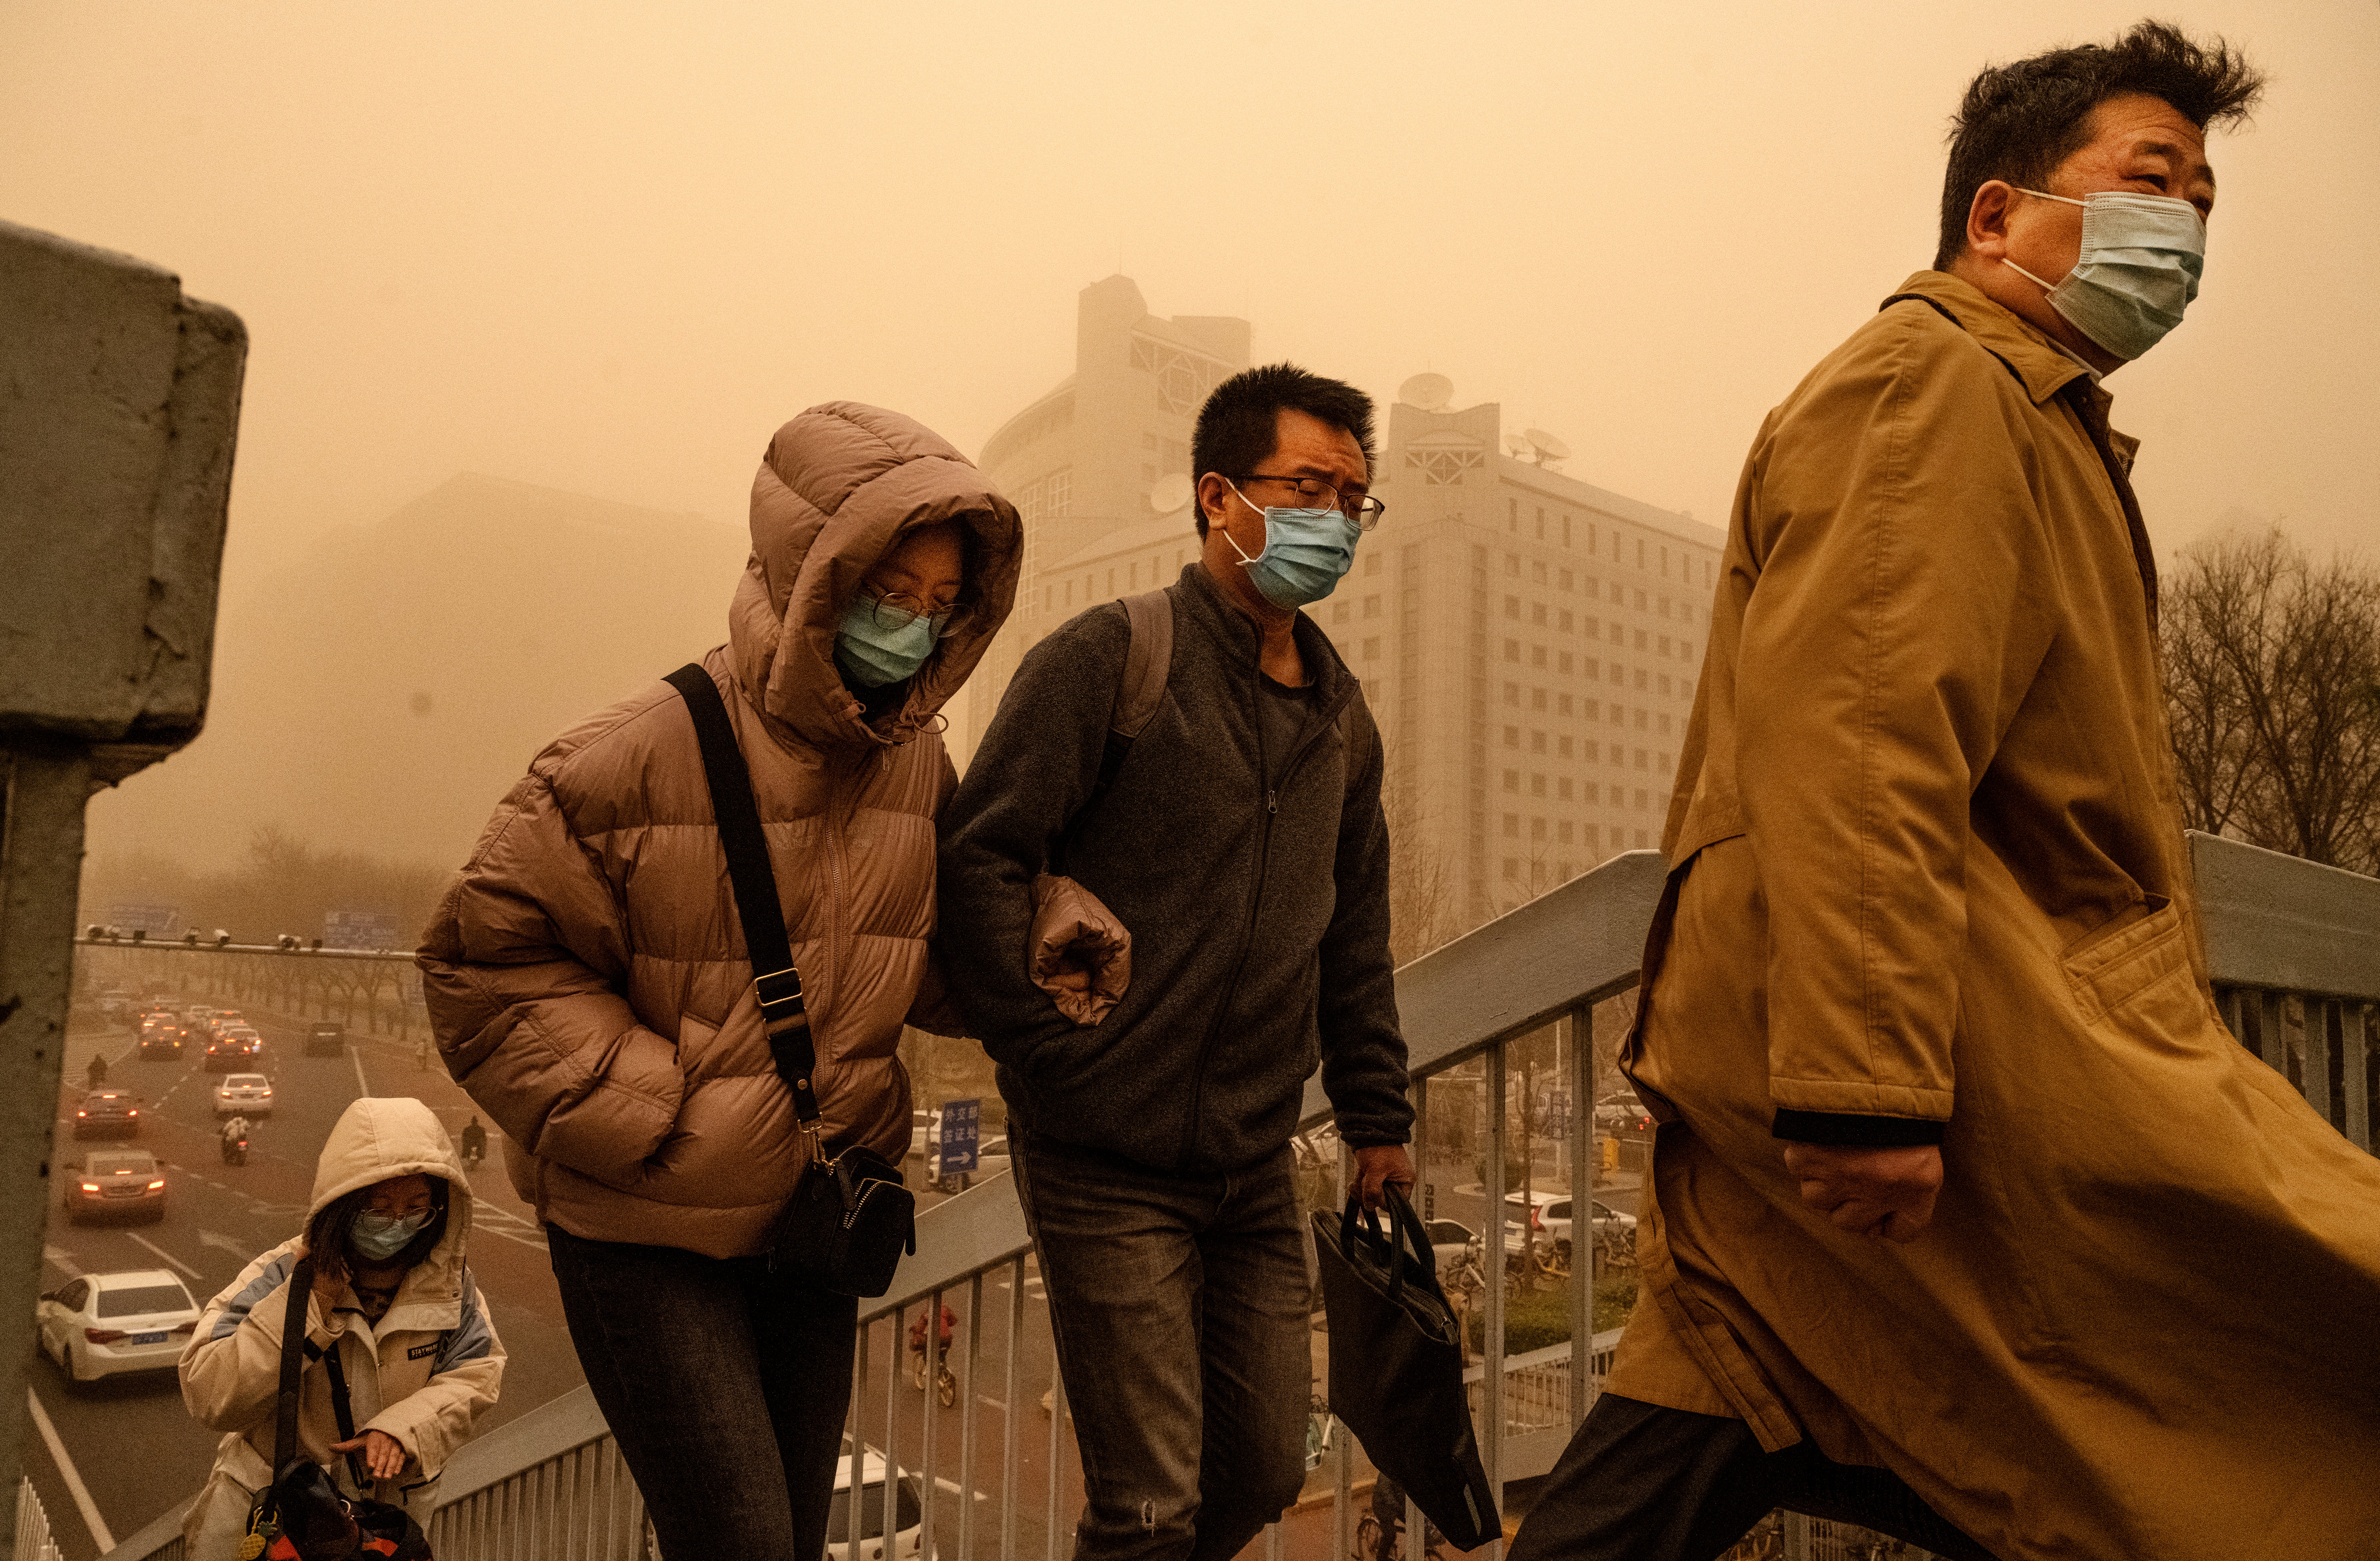 People wear protective masks as they commute during a sandstorm in Beijing